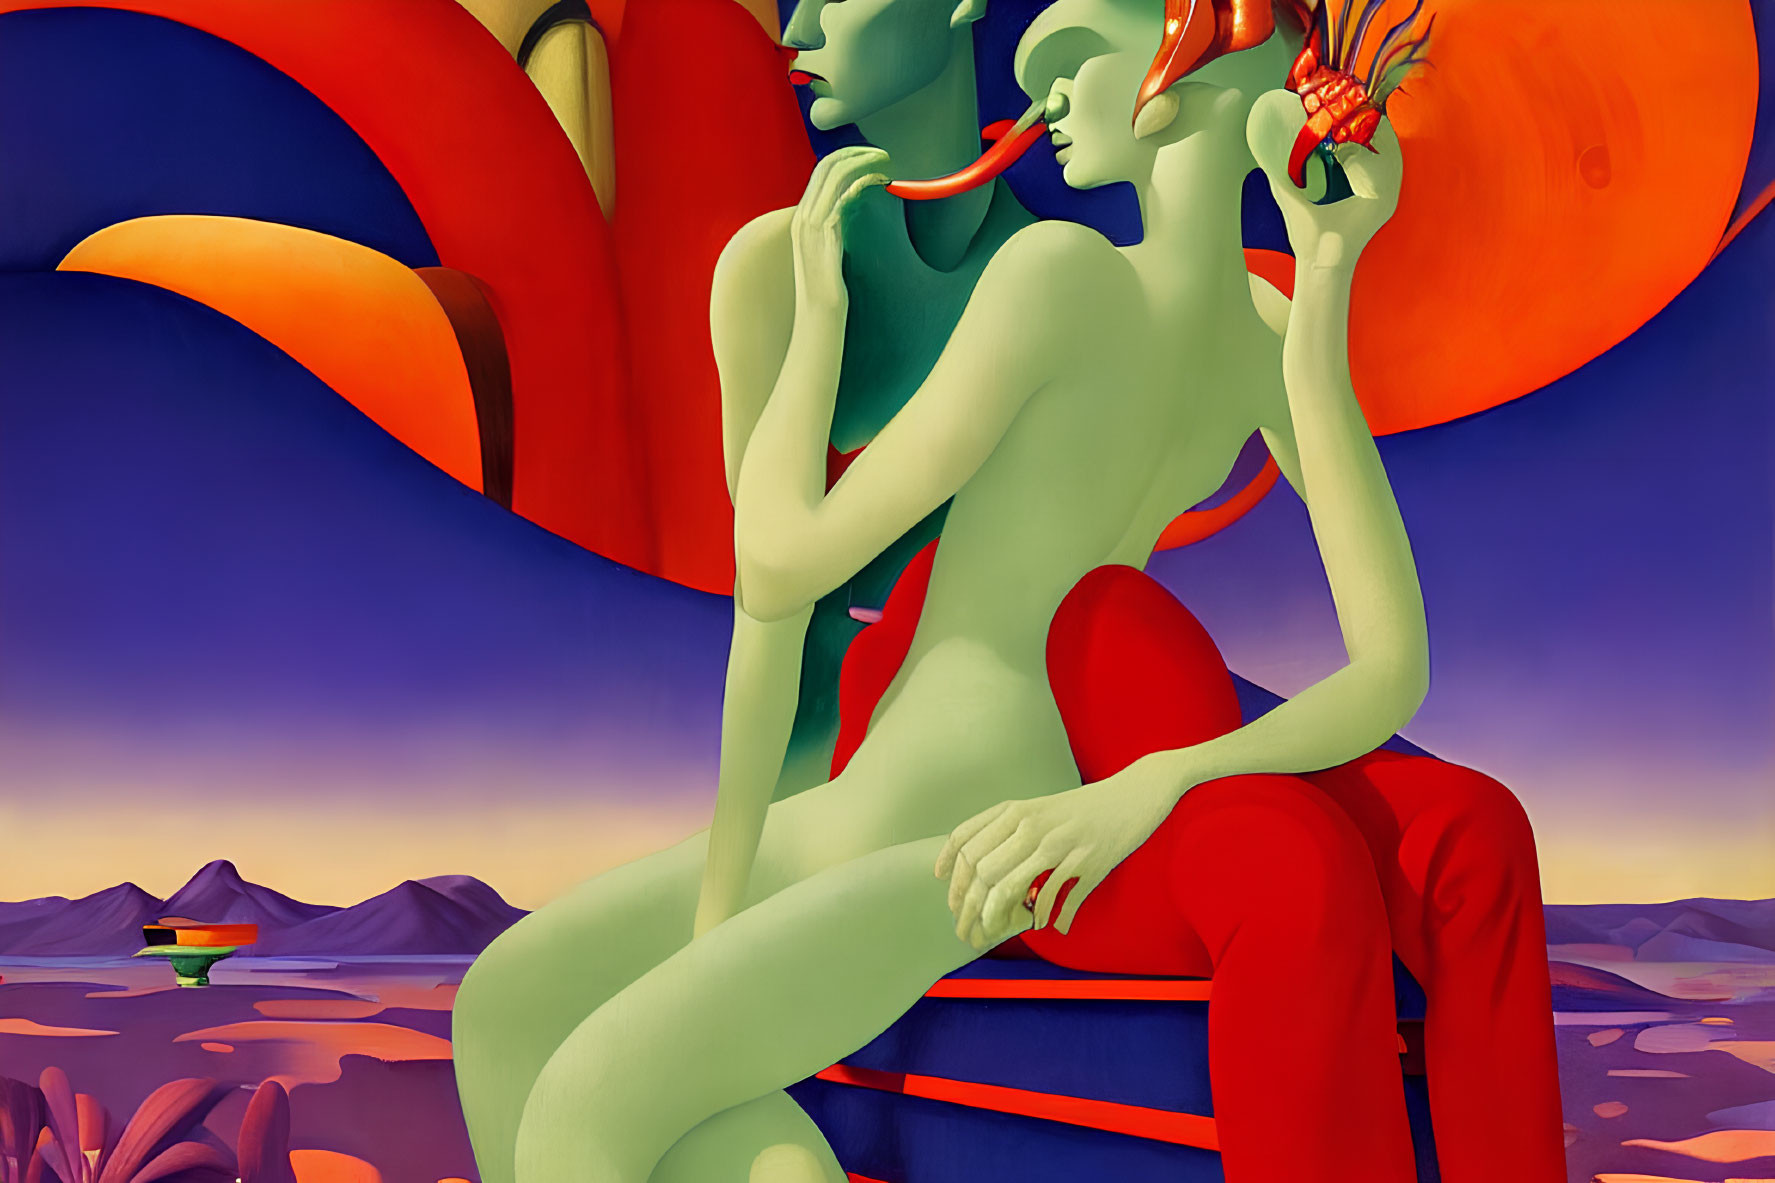 Vibrant Green and Red Stylized Figures in Surreal Landscape